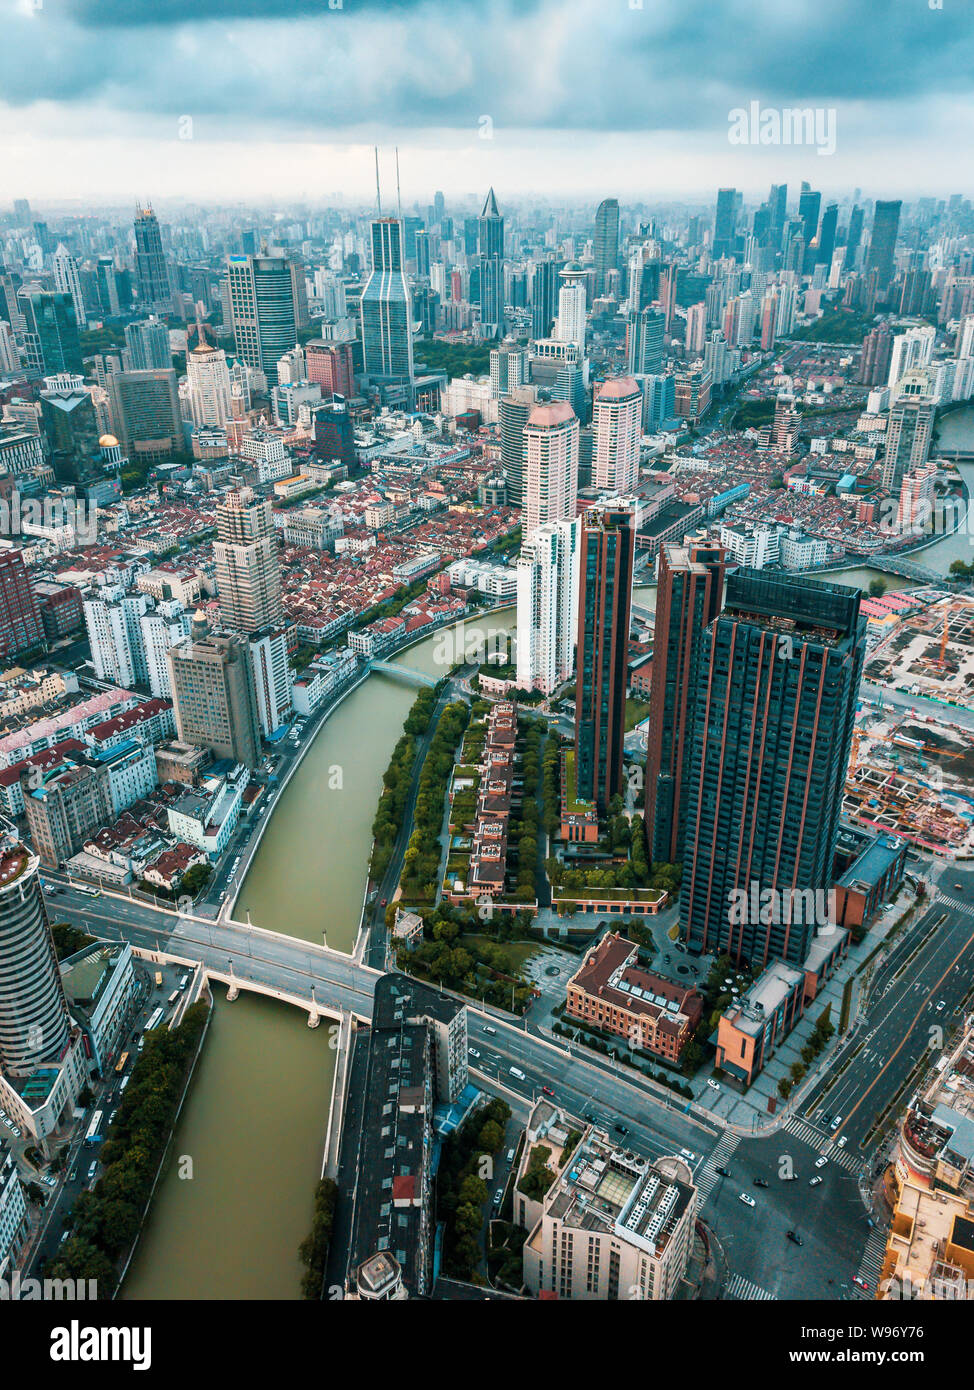 Aerial view of Shangai skyscrapers rising high in Chinese mega city Stock Photo